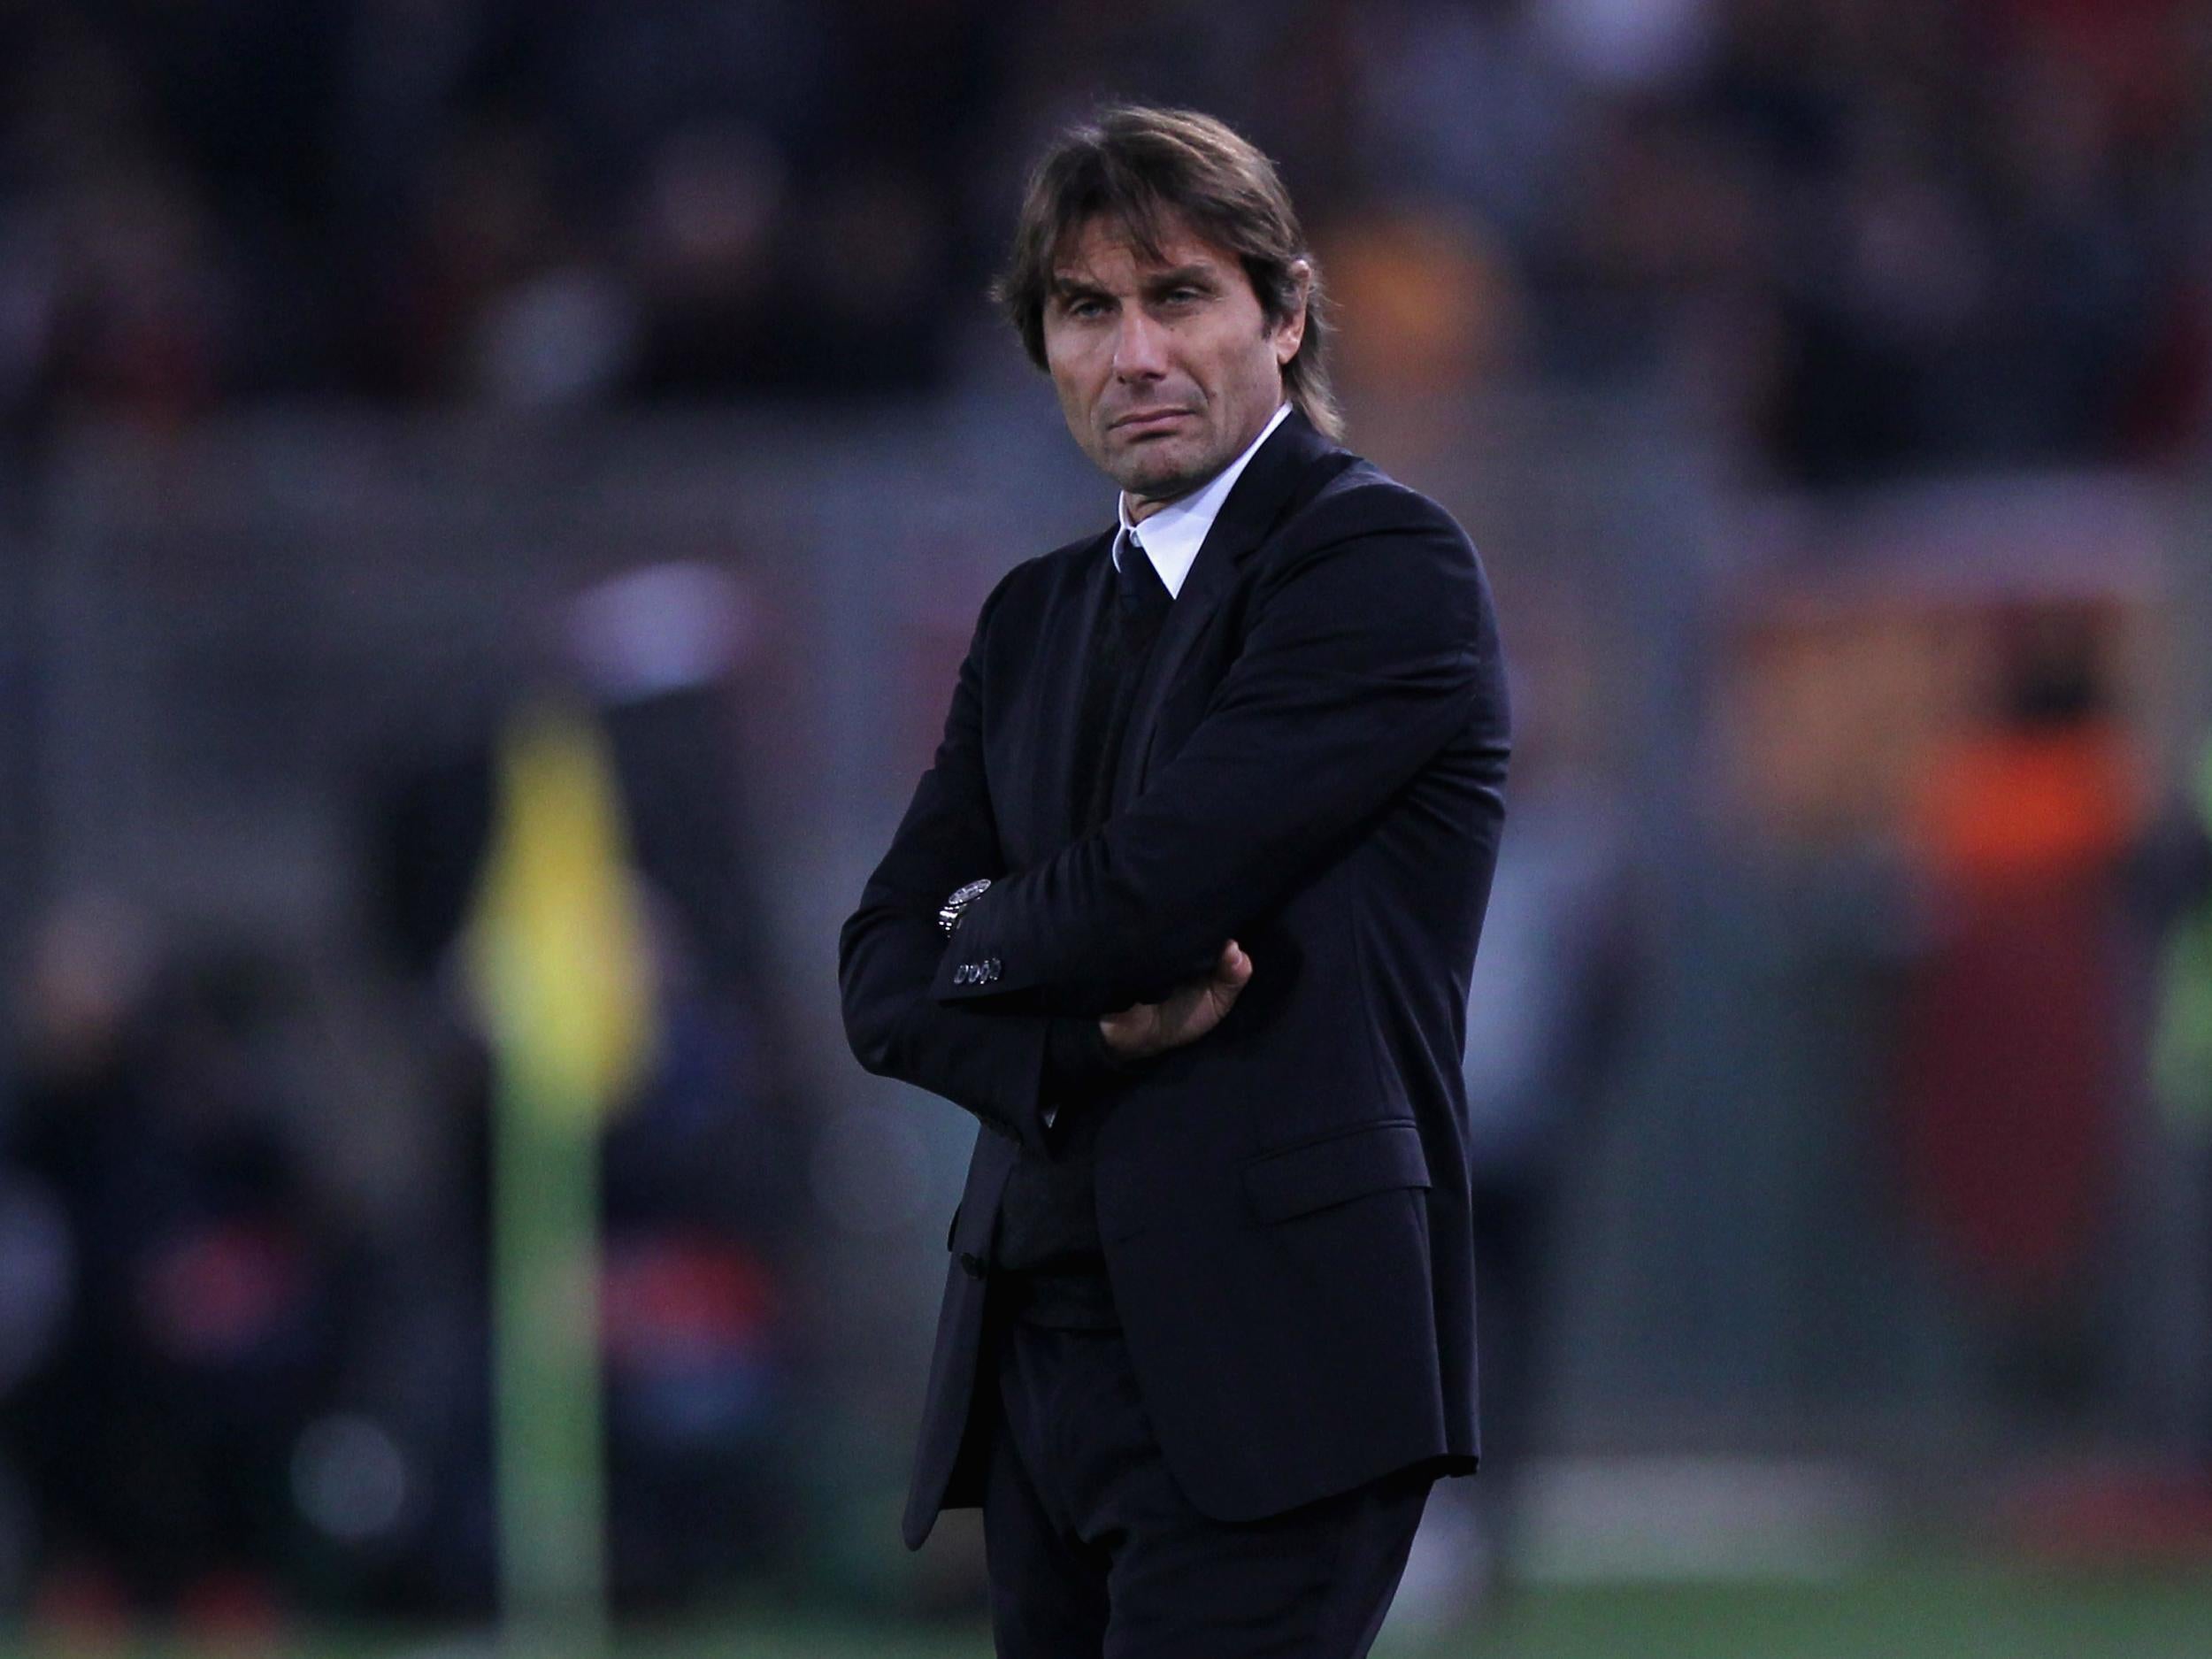 Antonio Conte does not know why Chelsea are leaking so many goals this season